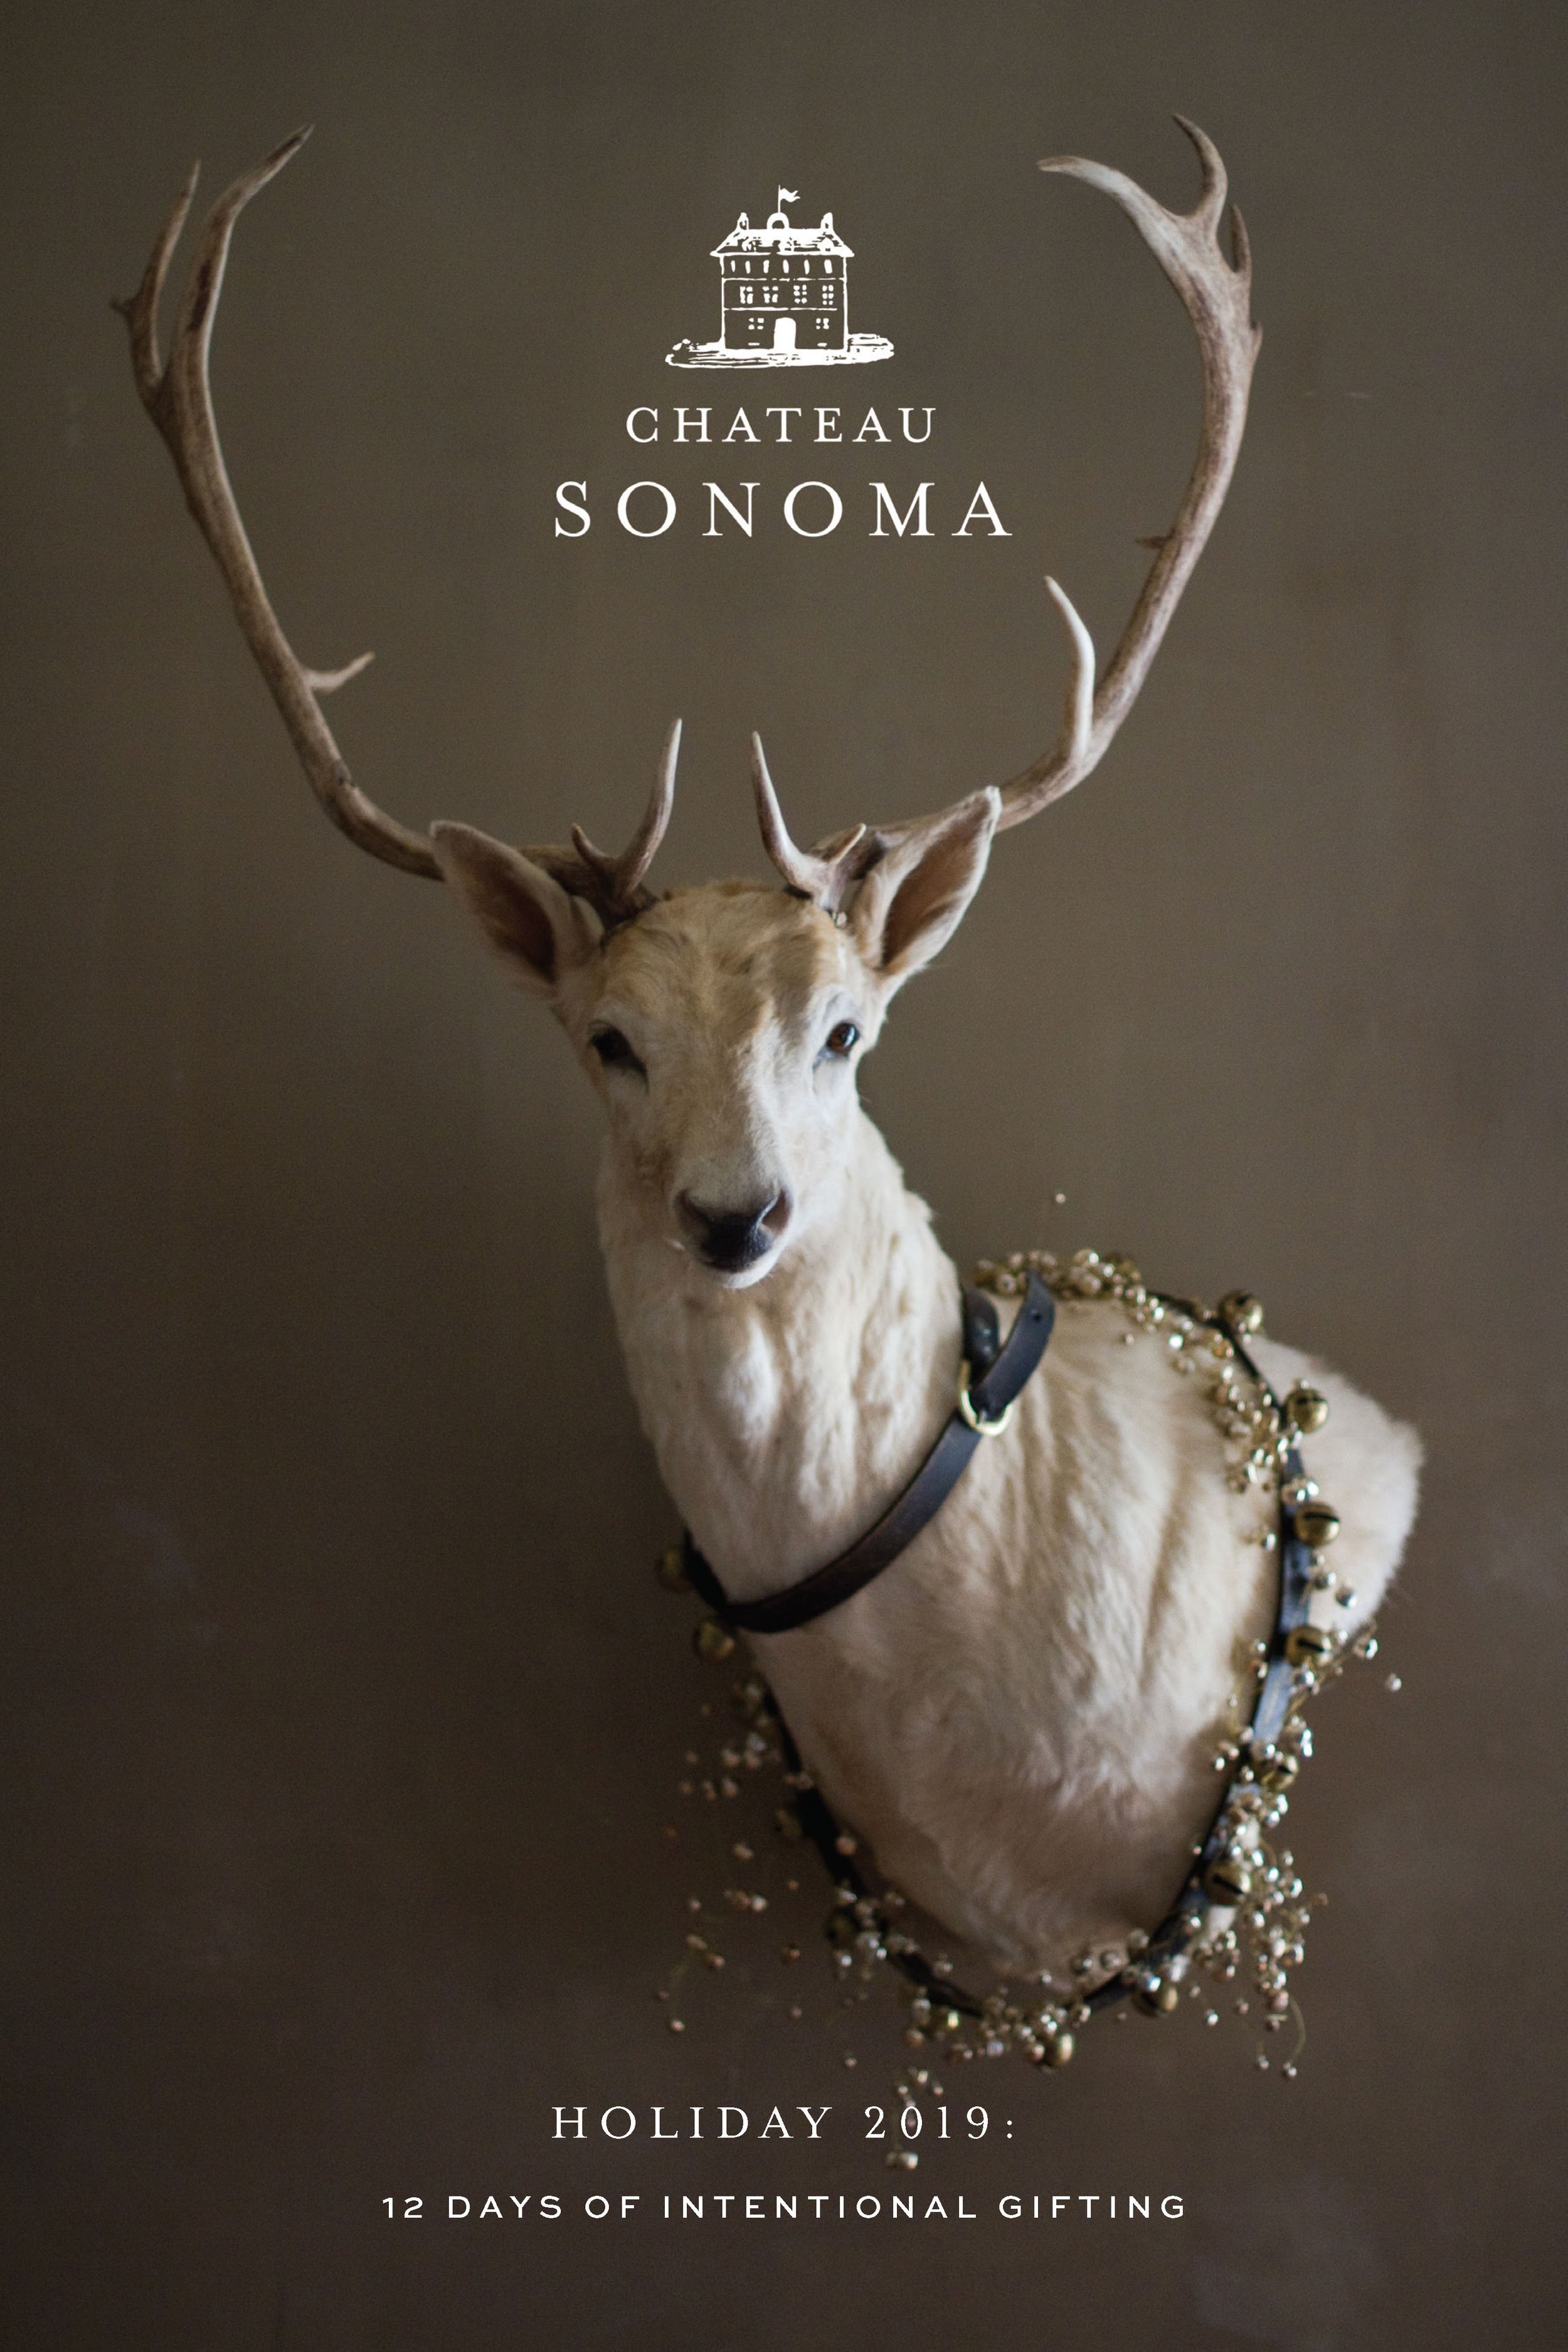 ChateauSonoma_HolidayLookbook_19_pages (1)_Page_01.png